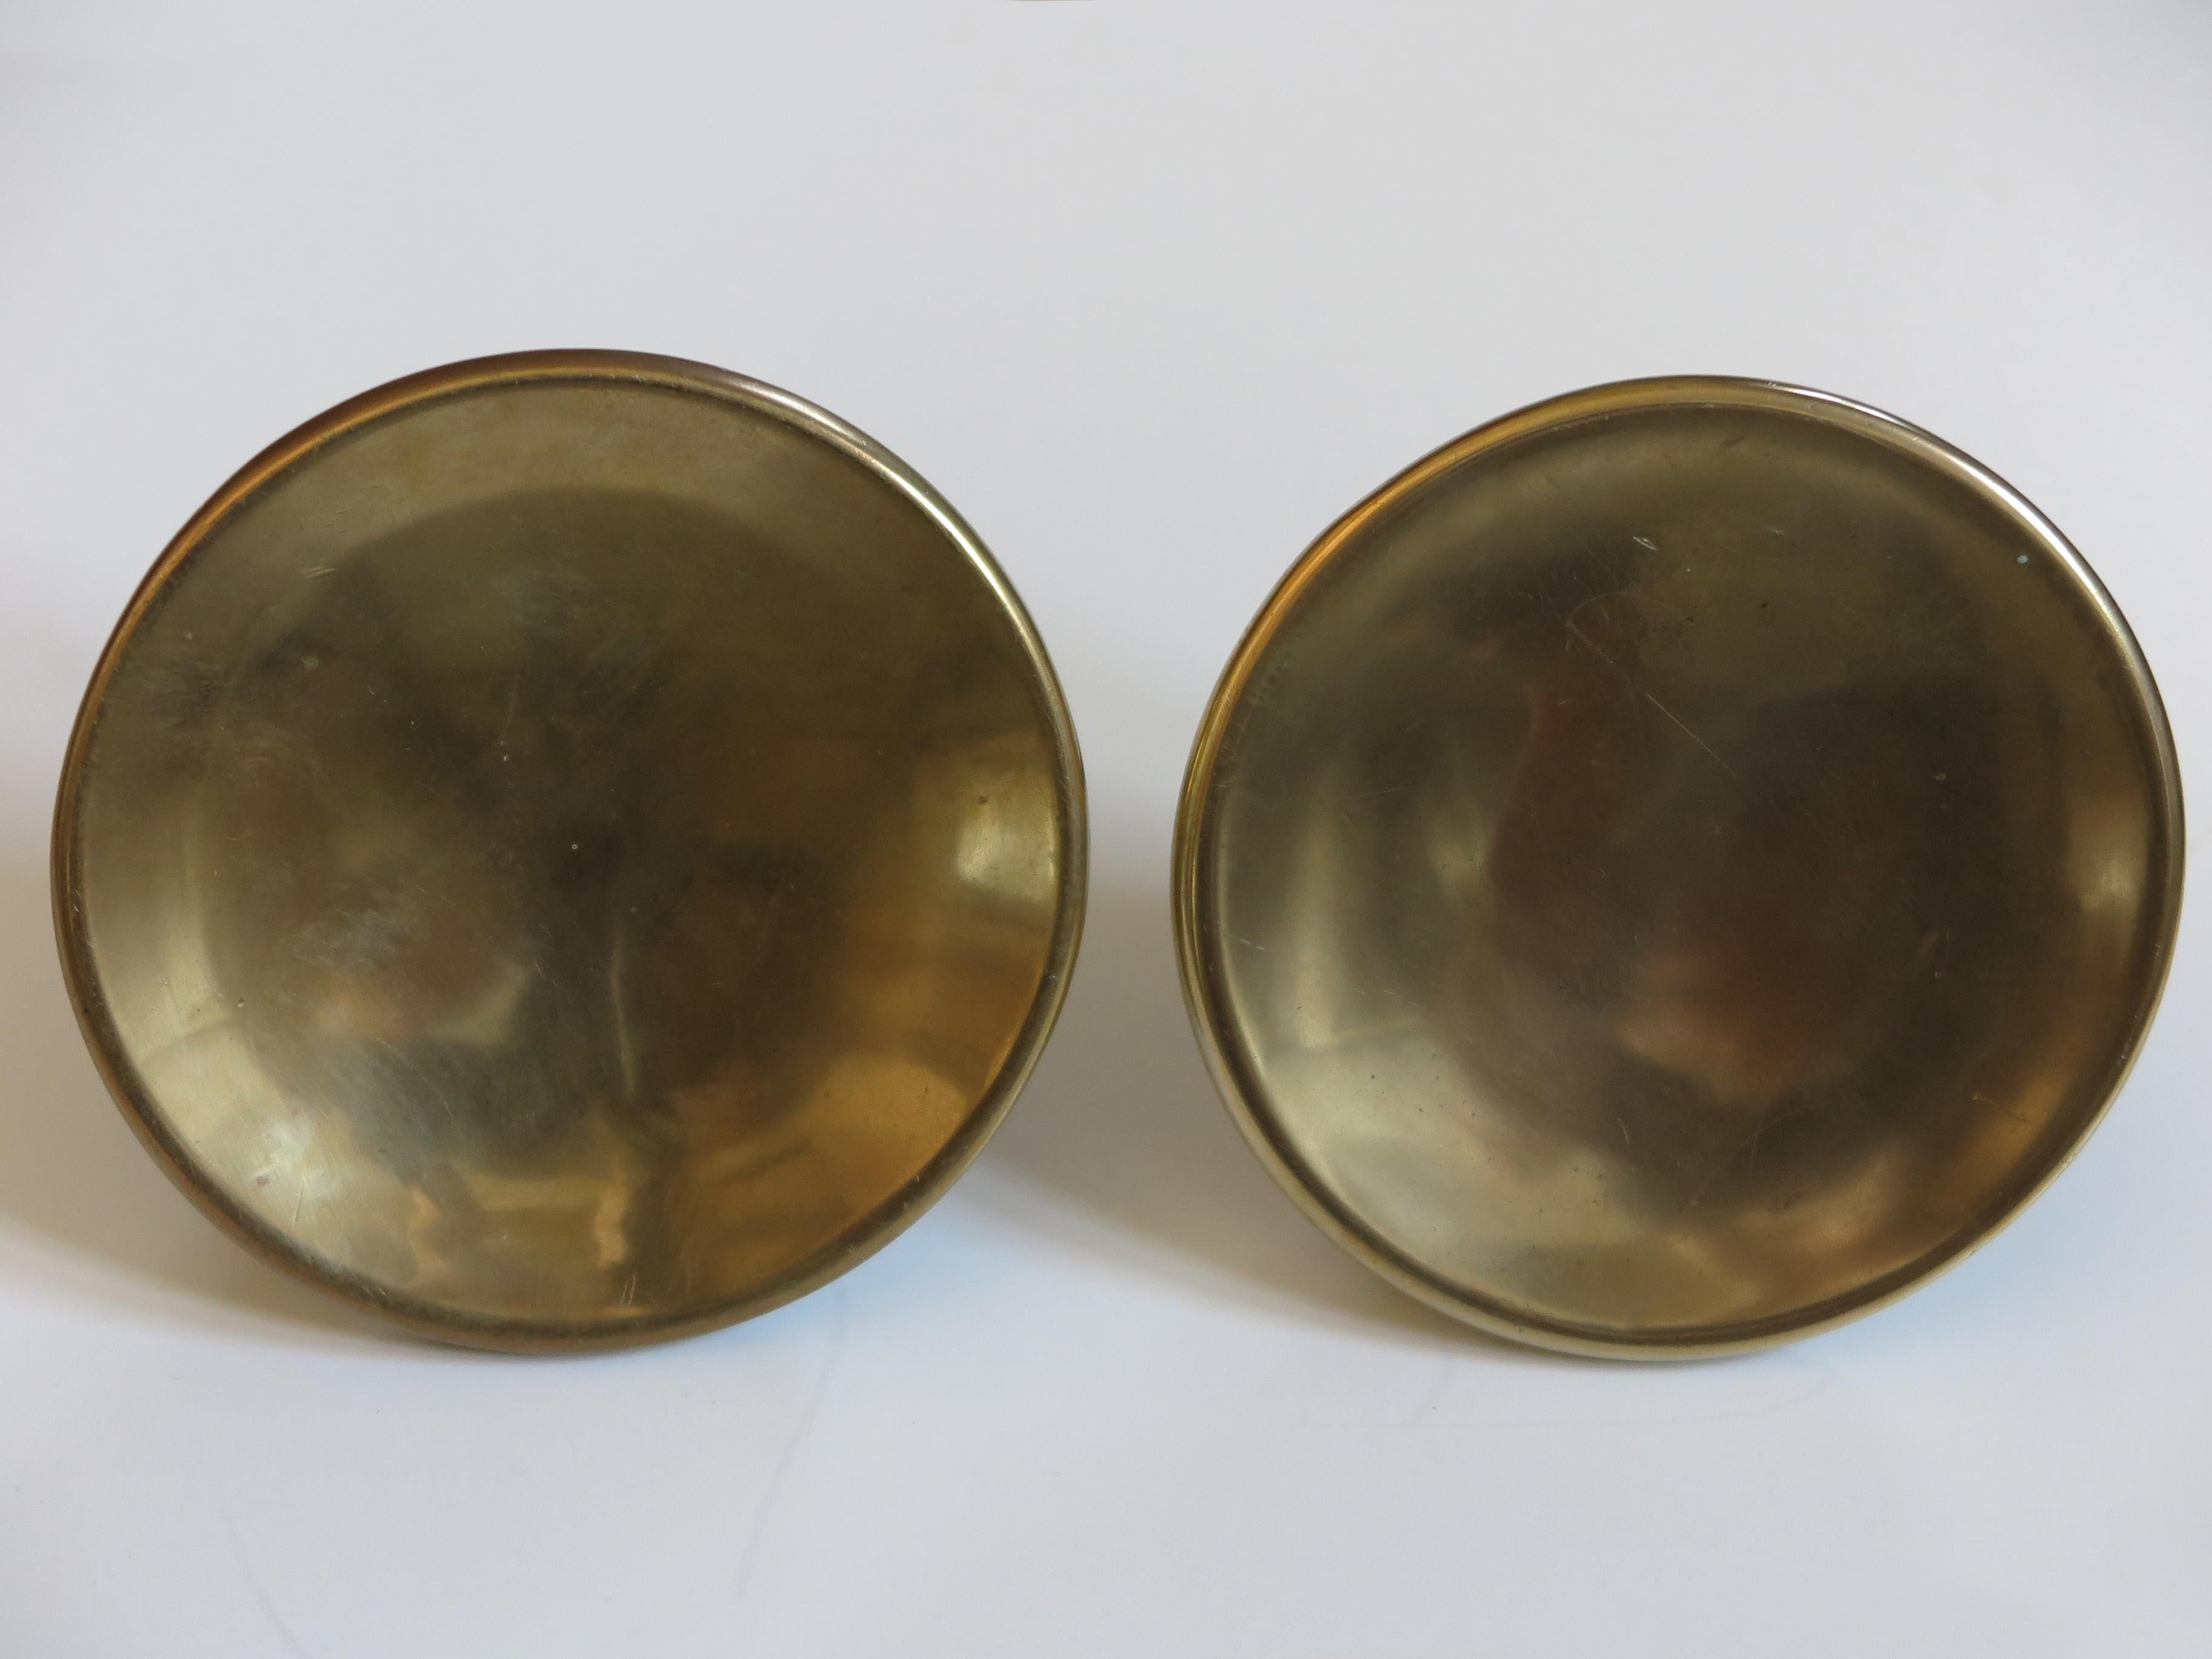 Set of two rare and amazing big Italian solid brass door handles, 1950s

Please note that the items are original of the period and this shows normal signs of age and use.

Dimensions: diameter 14.5 cm, depth without screw 5 cm, depth with screw